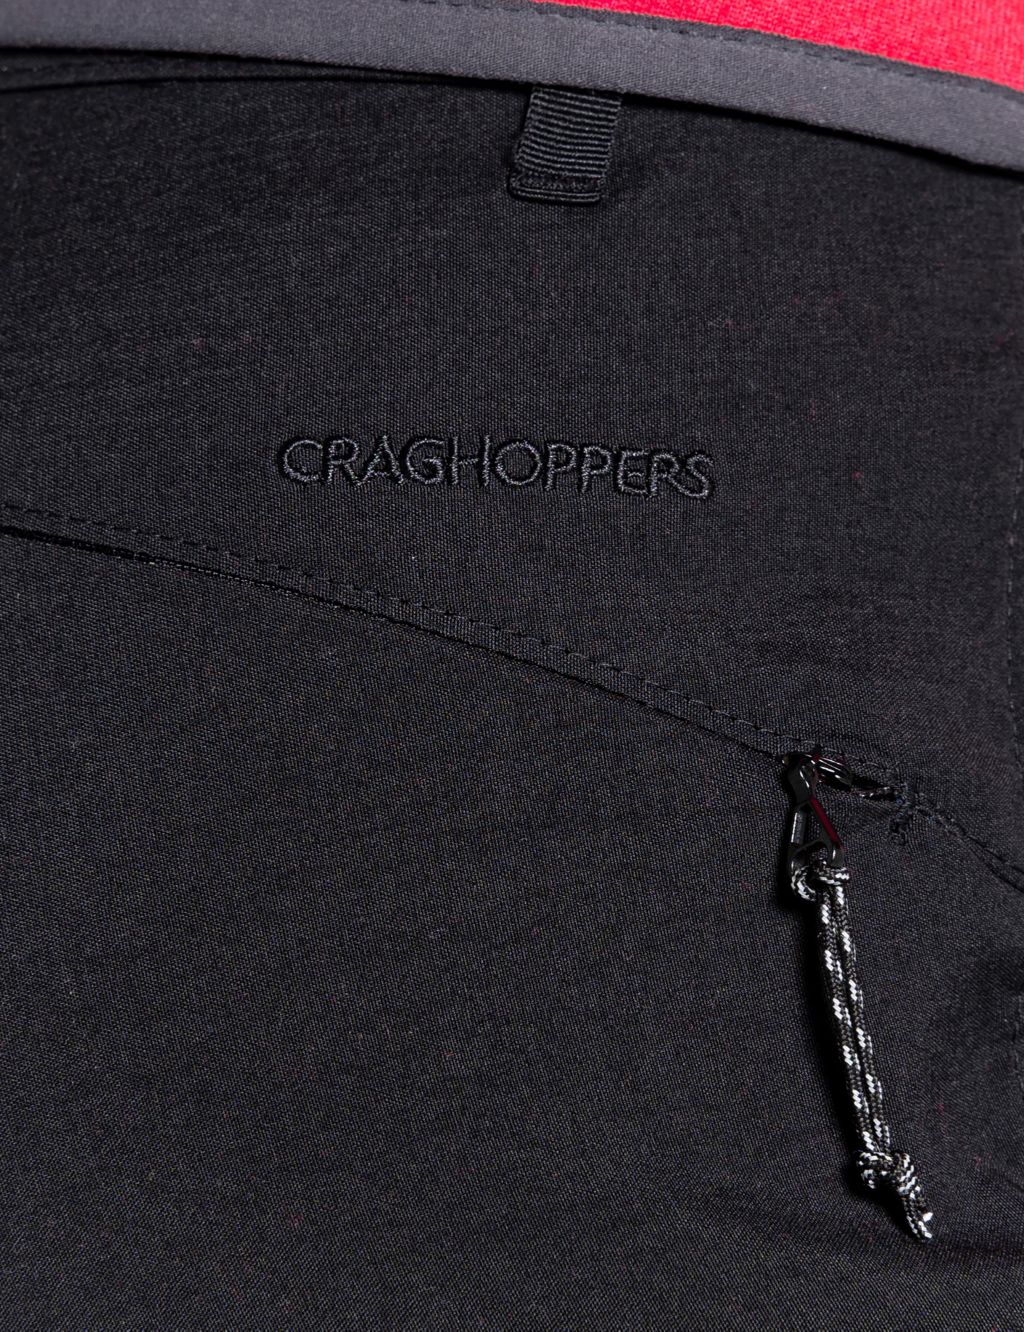 Tapered Cropped Walking Trousers image 7